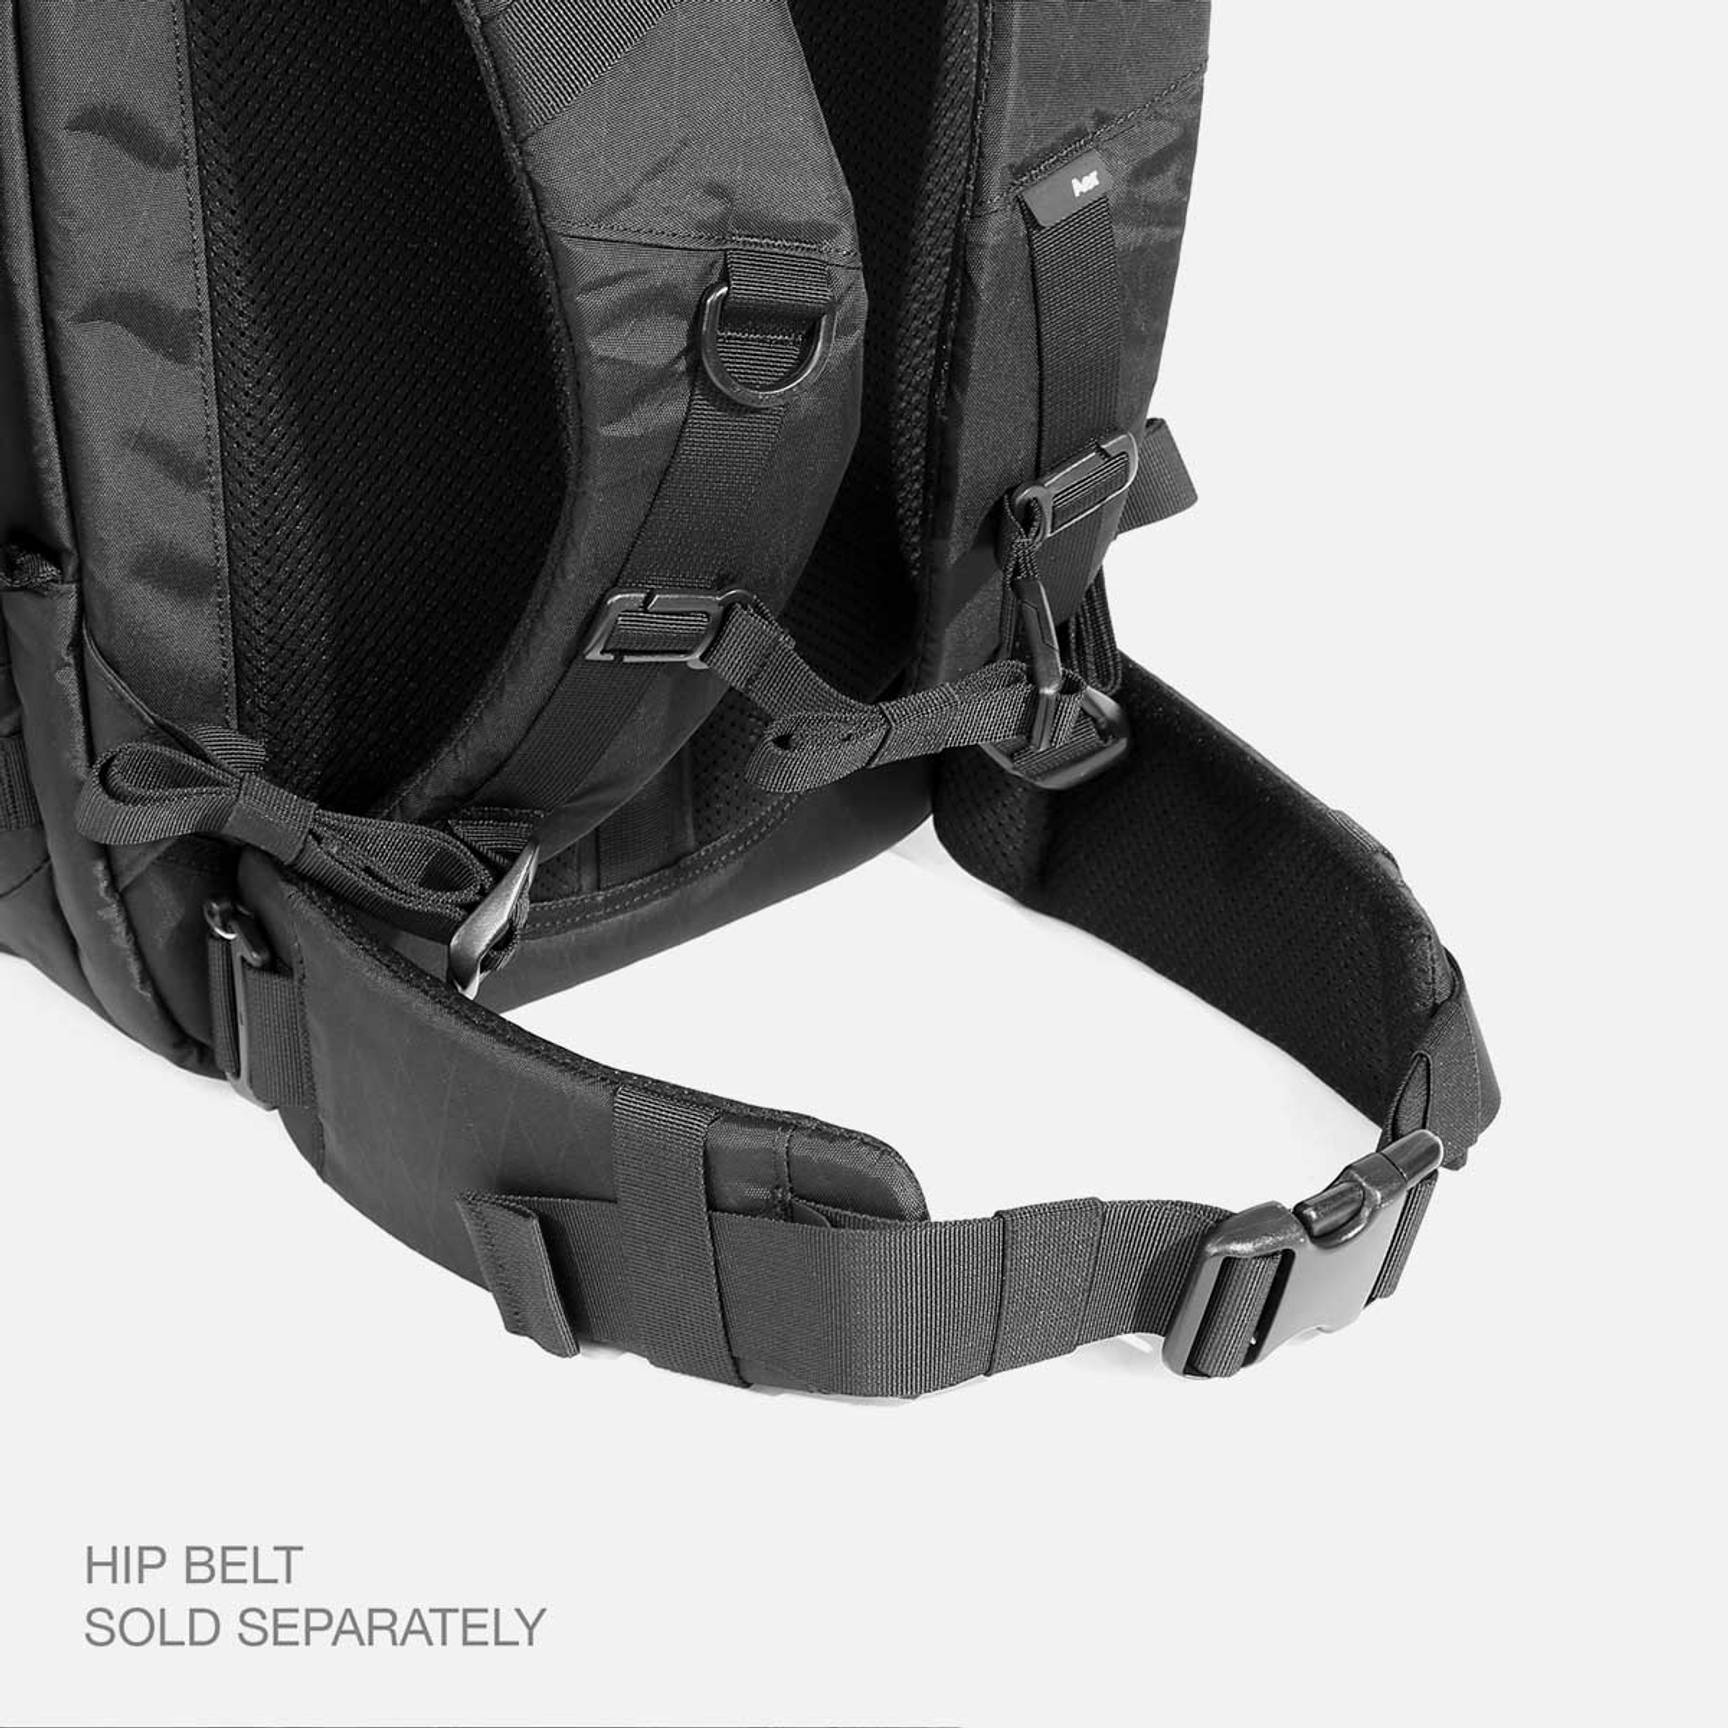 https://cld.accentuate.io/39727833284704/1689827696342/AER29033_travelpack3small_xpac_hipbelt2.jpeg?v=1689827696342&options=w_1728